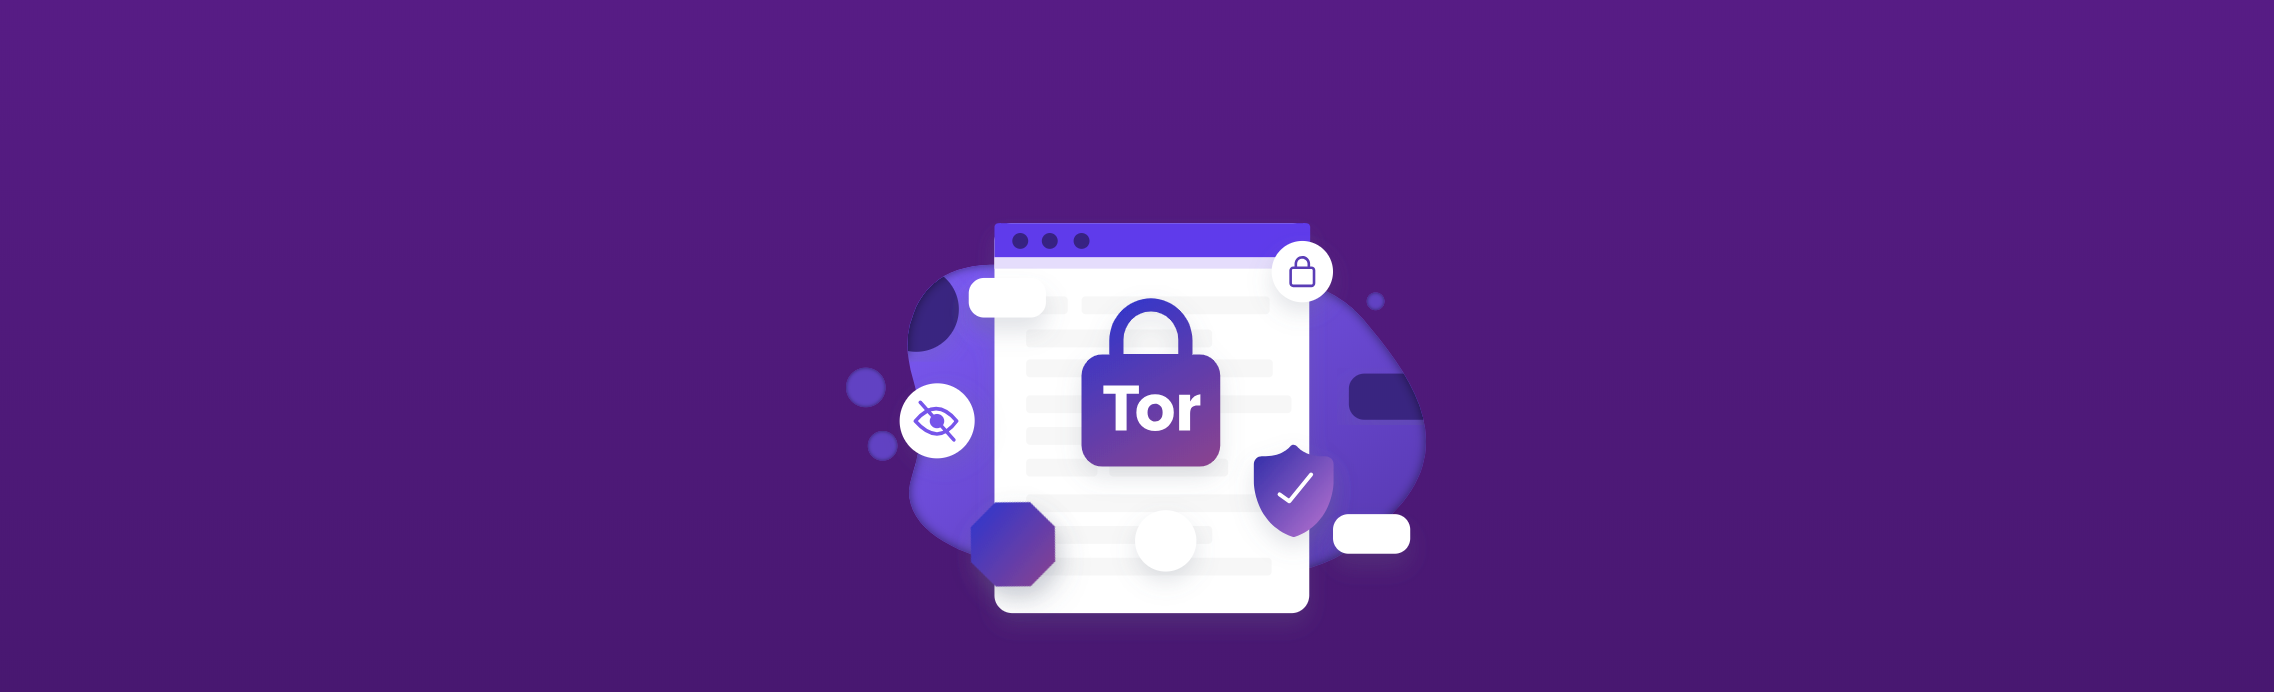 How to Anonymously Access Content on the Internet with Tor 5